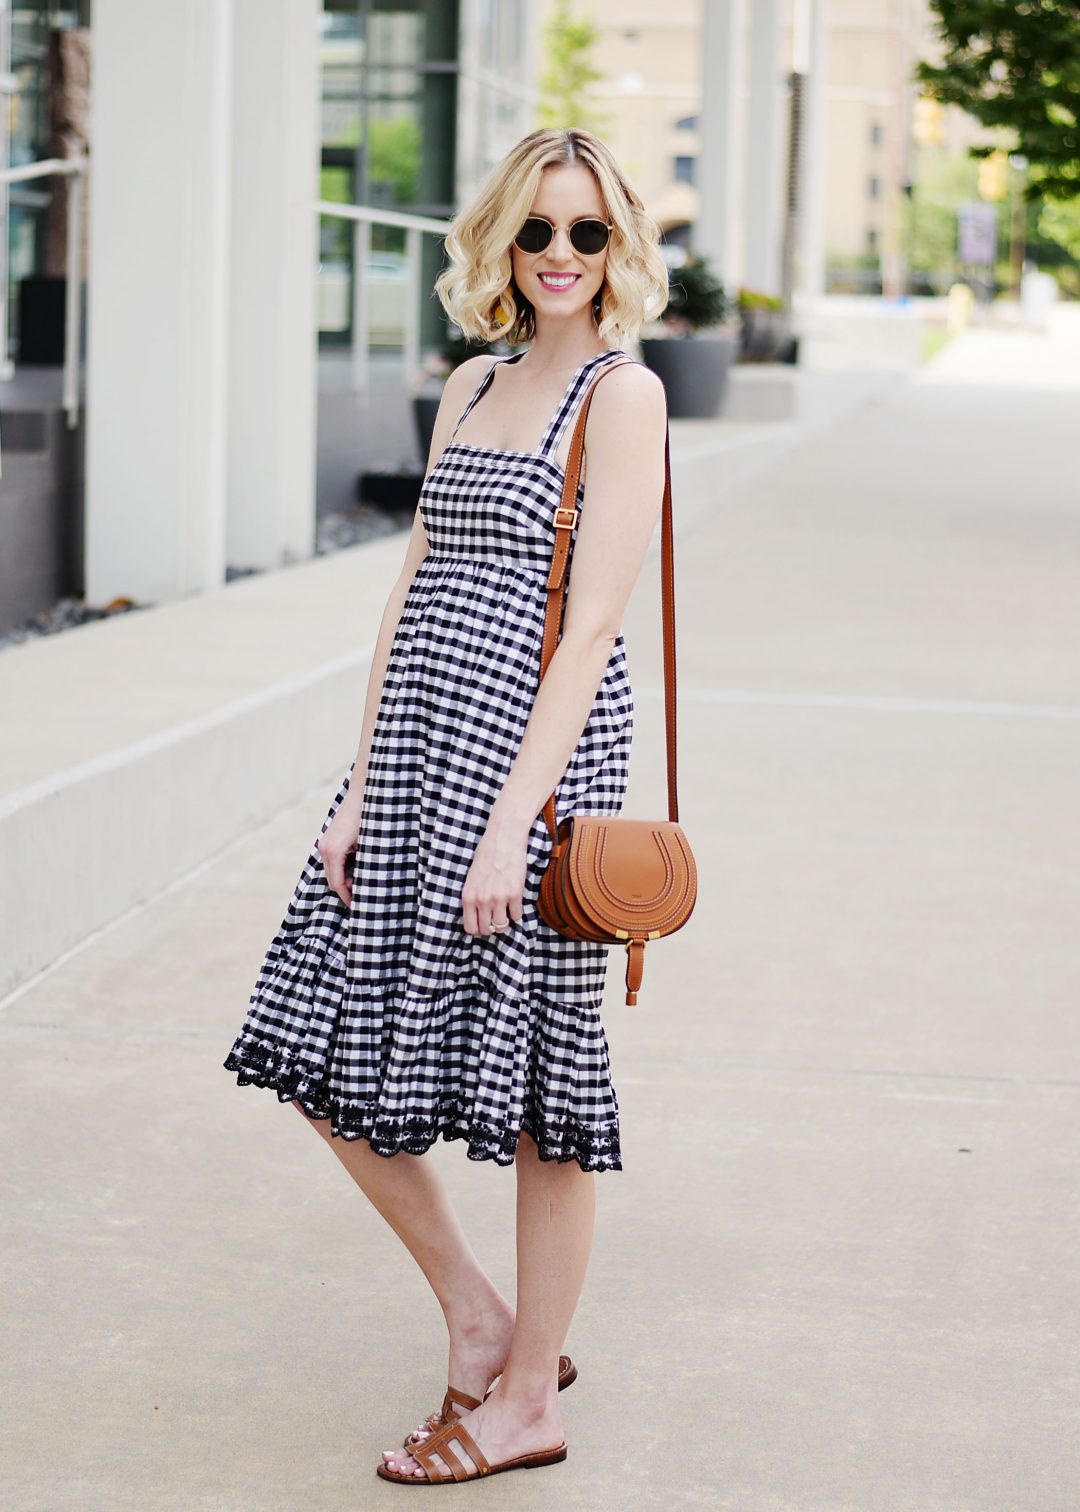 Gingham Dress - Straight A Style